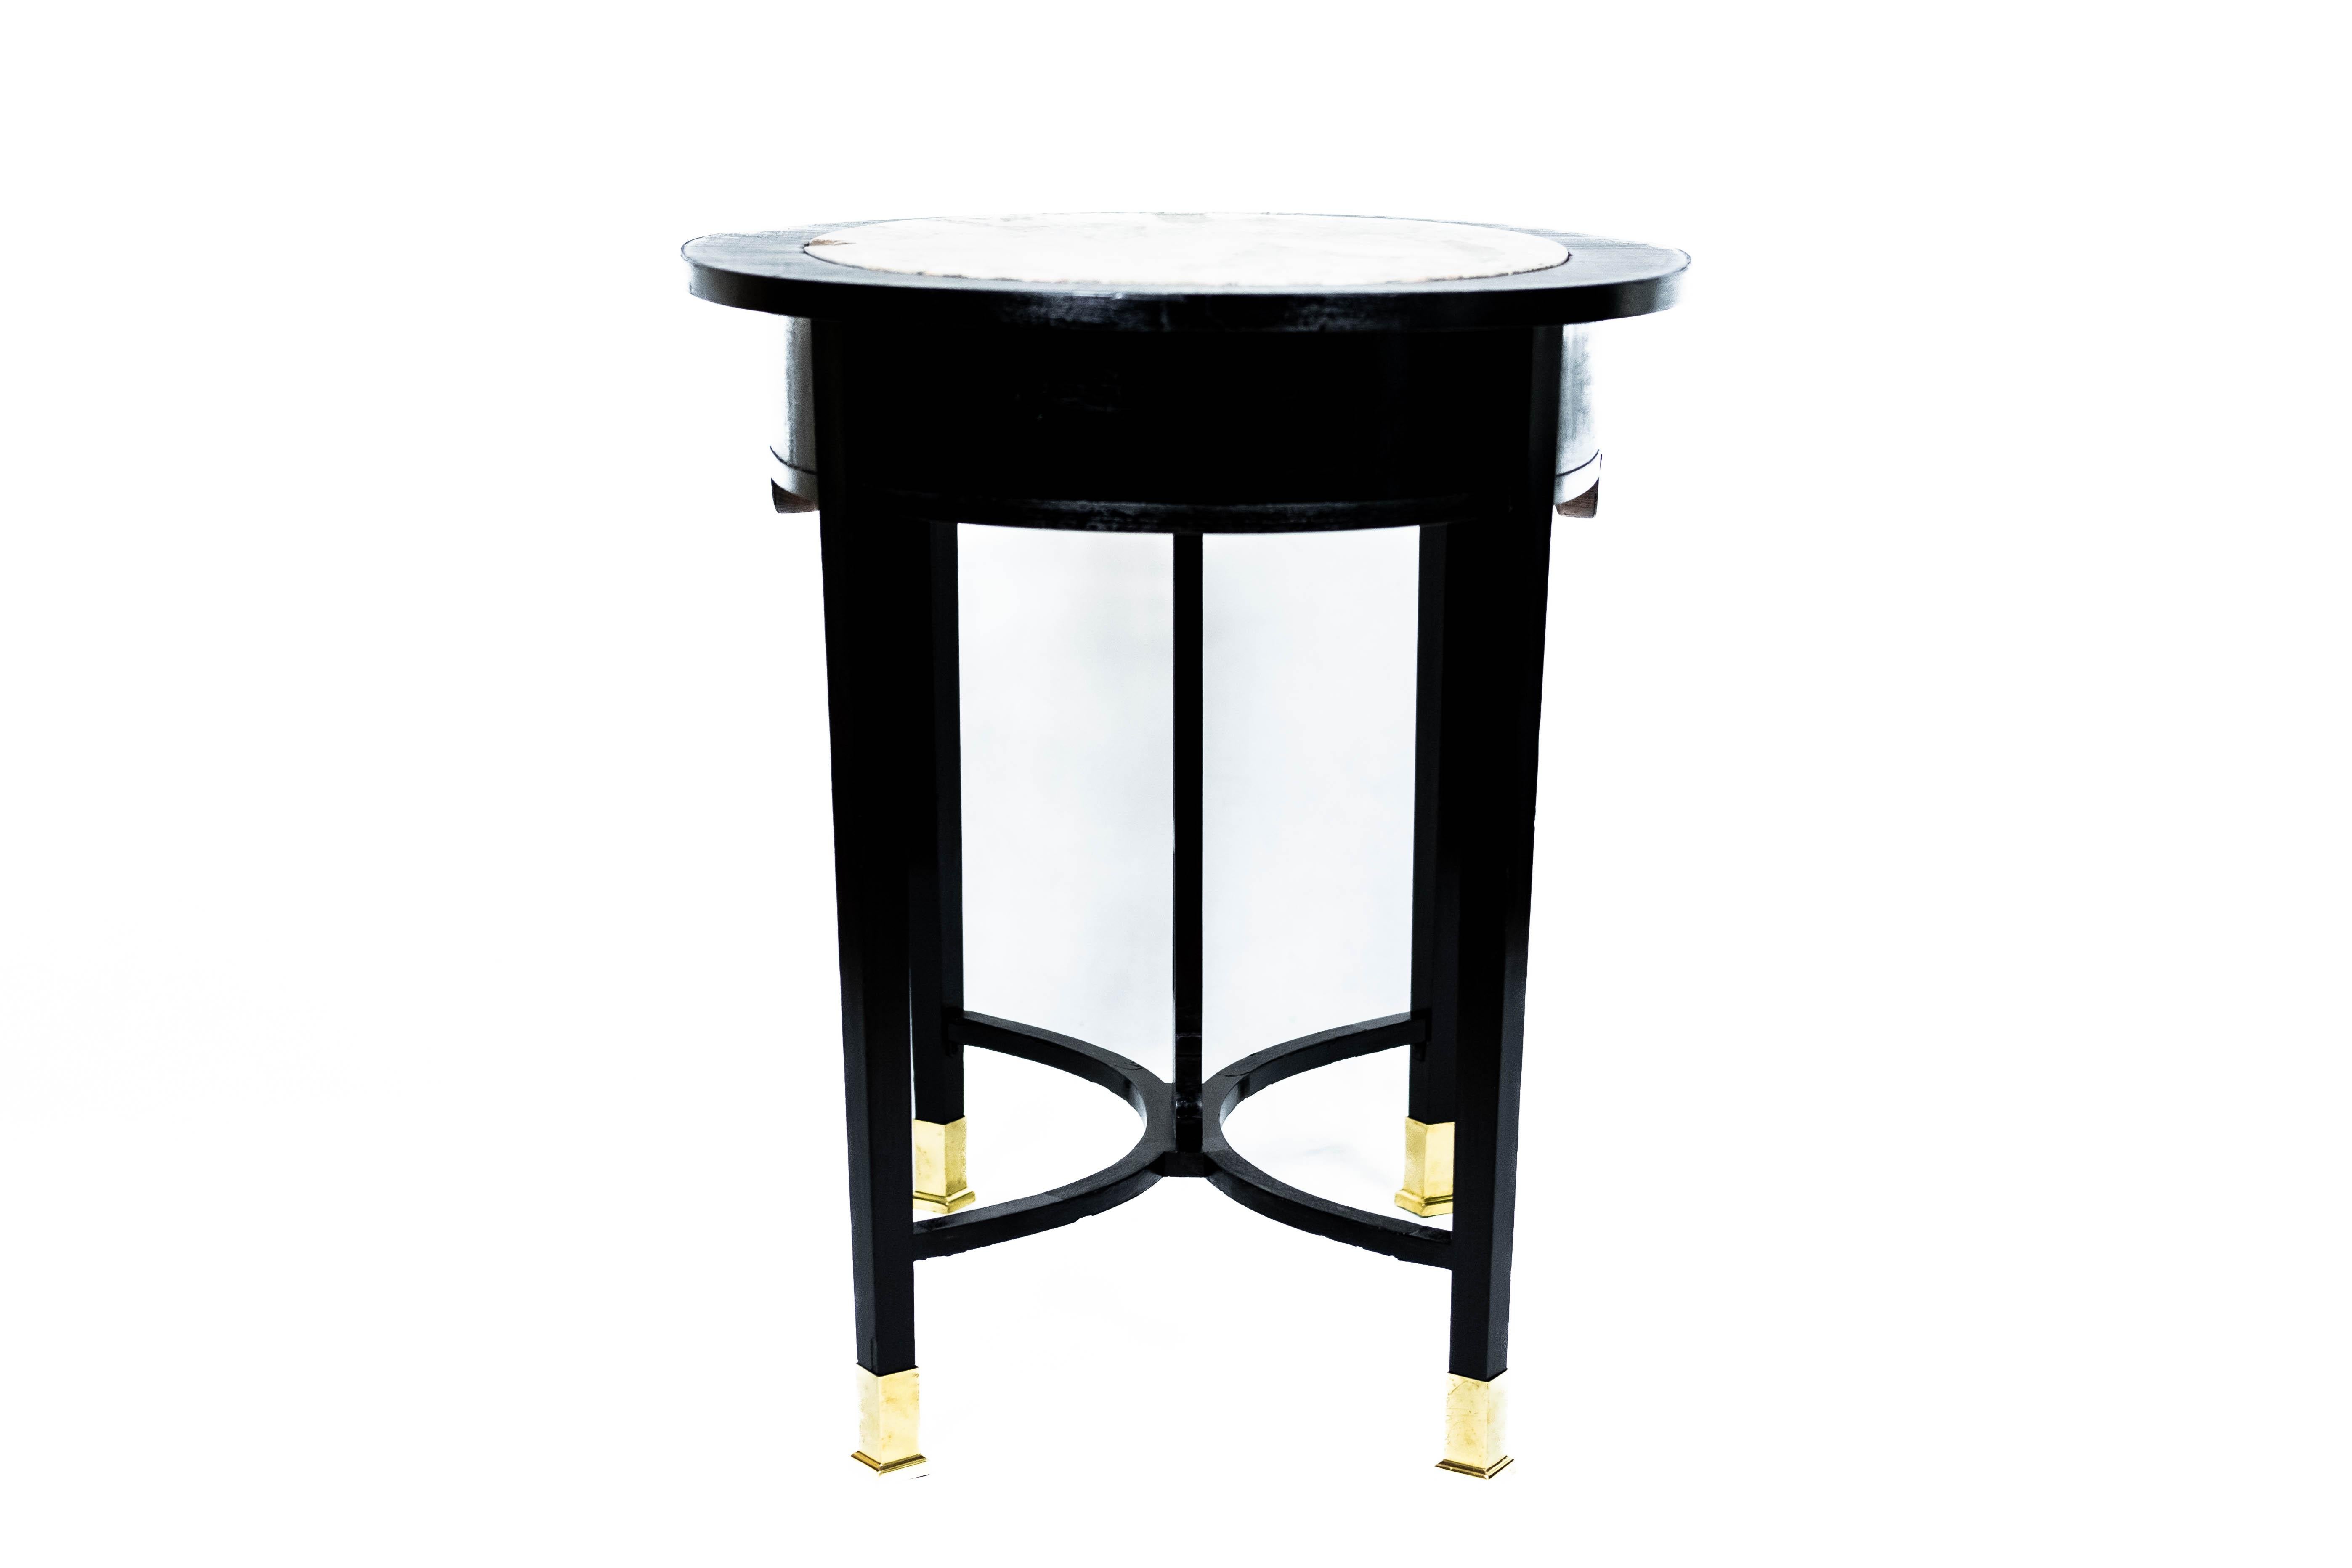 Small black Art Nouveau Table with Marble-Plate and Brass-Fittings (circa 1910) For Sale 5